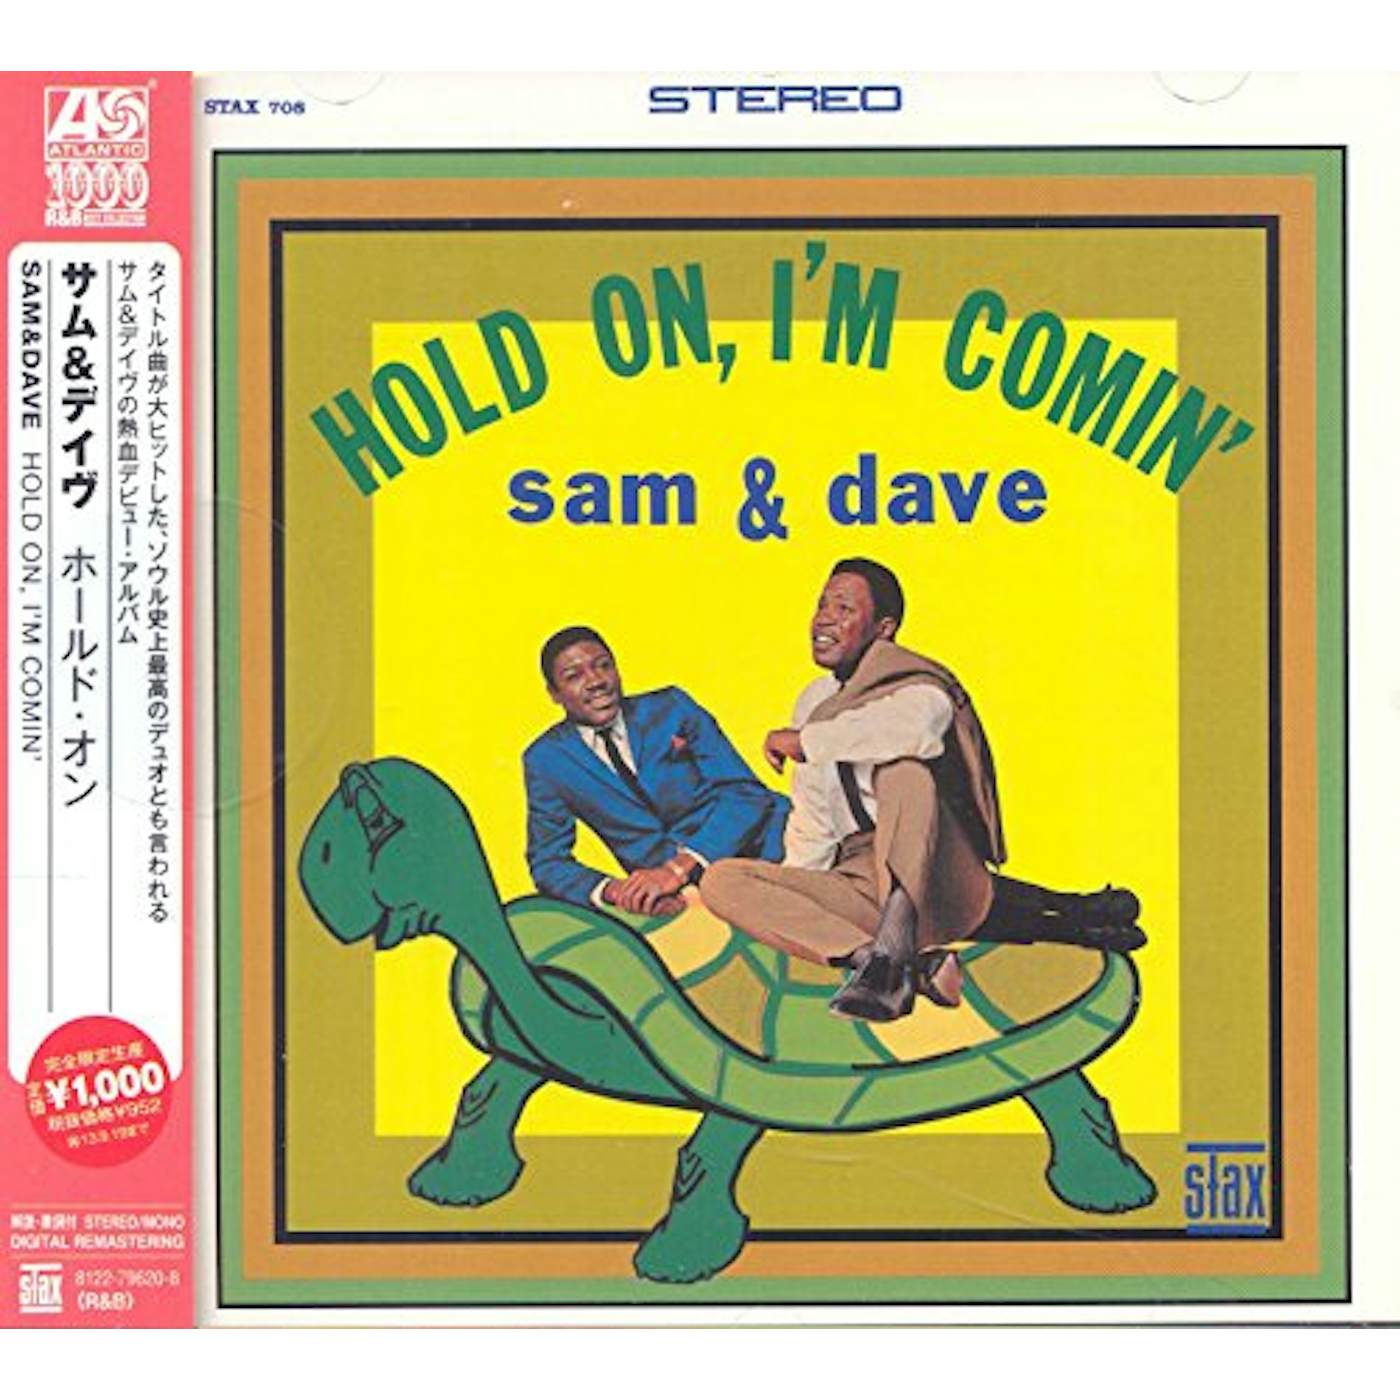 Sam & Dave HOLD ON I'M COMING CD